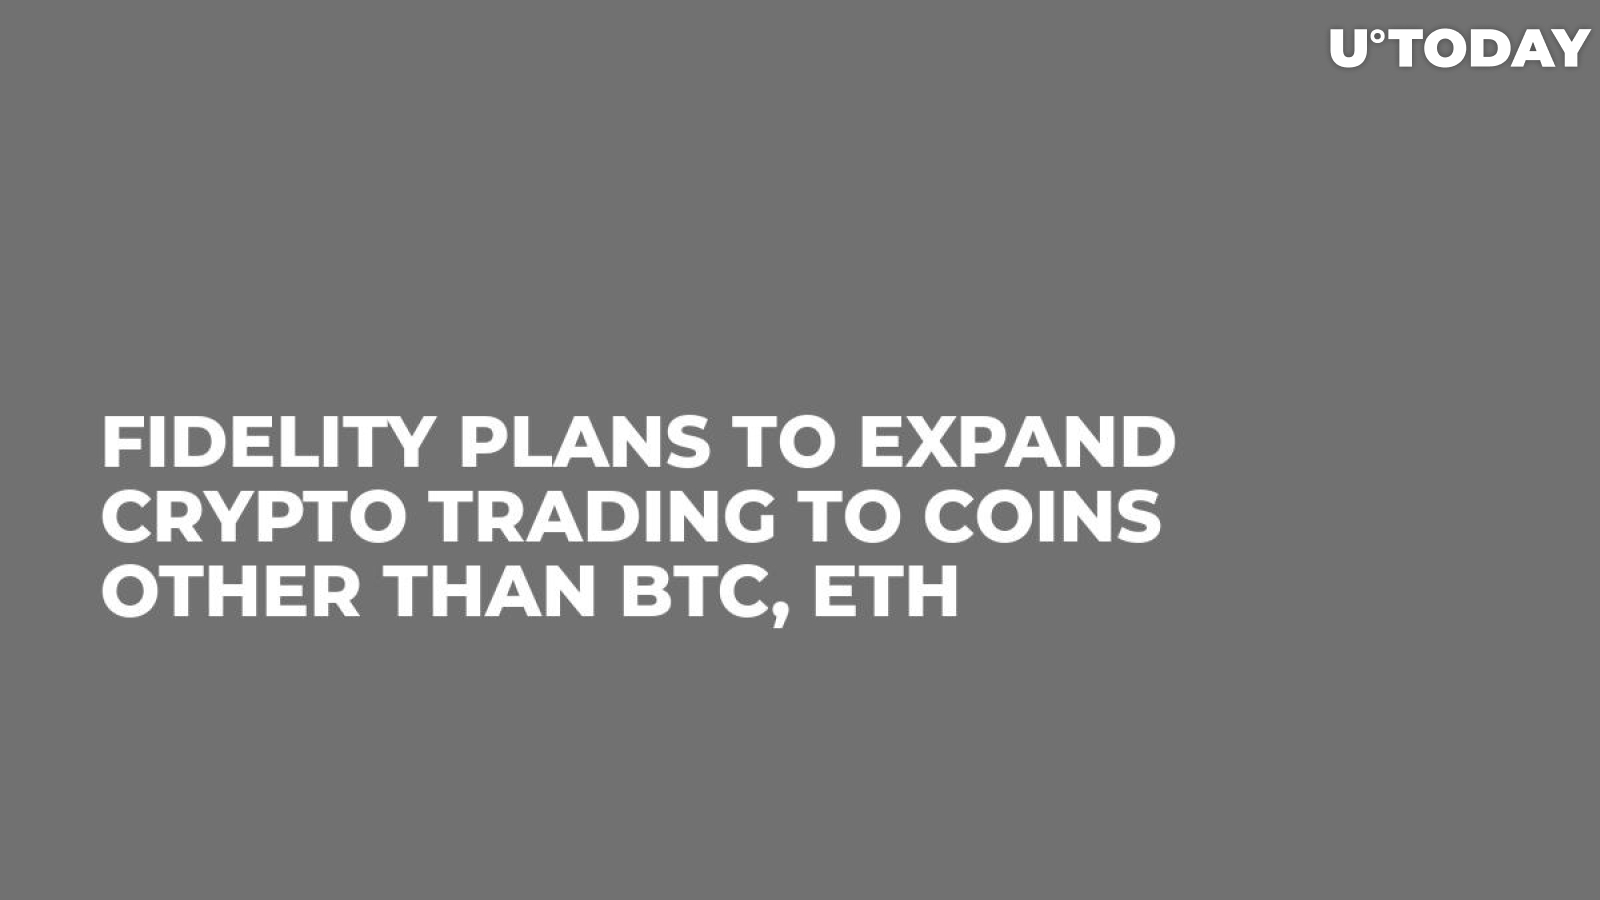 Fidelity Plans to Expand Crypto Trading to Coins Other than BTC, ETH